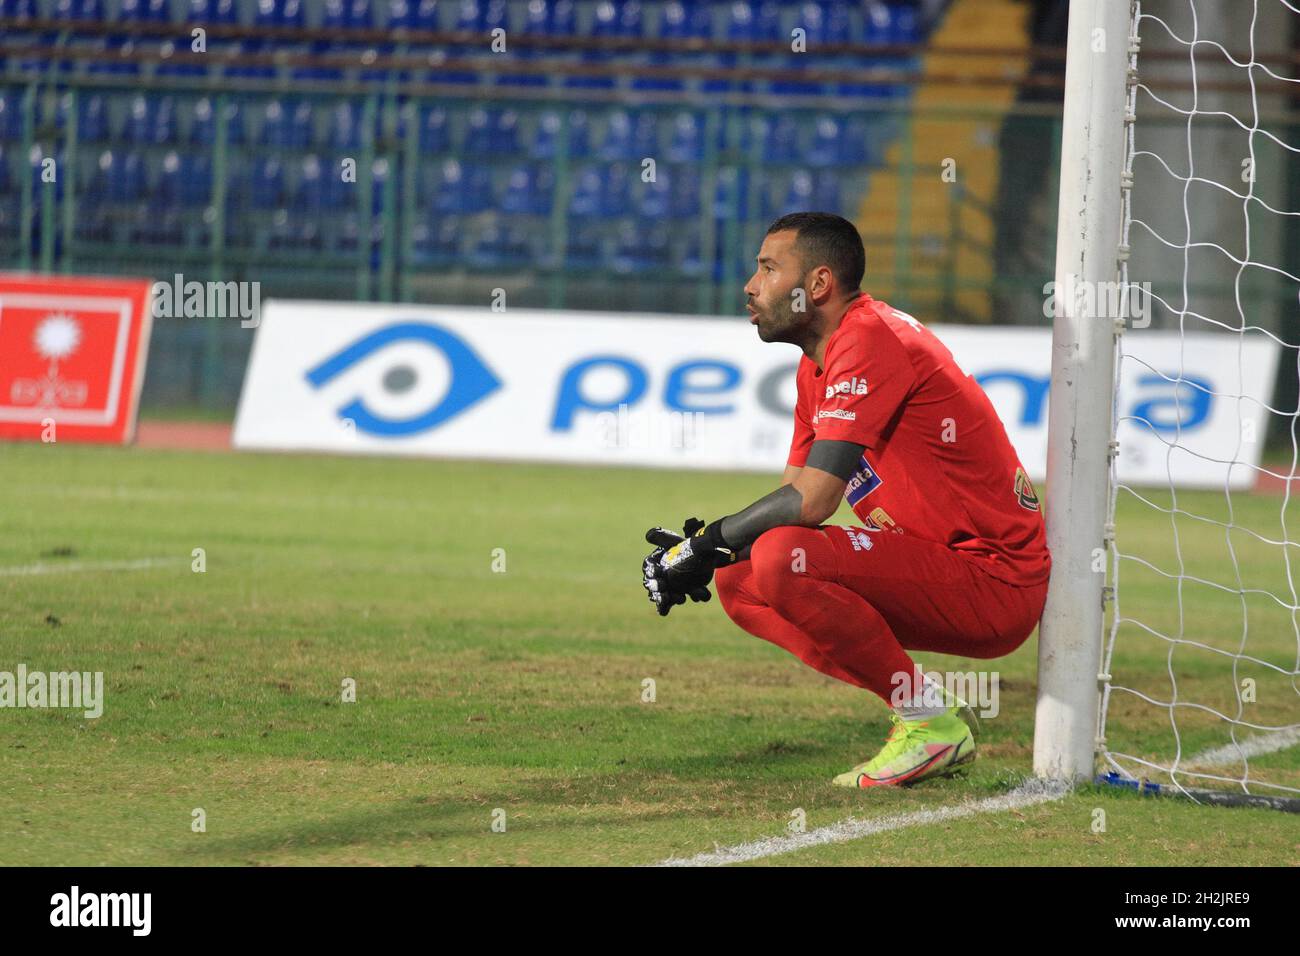 Richard Marcone (12) goalkeeper of the Potenza during the Italian Football Championship Serie C Girone C Lega Pro, tenth day of the first round Paganese vs Potenza. Paganese wins 2 - 0. (Photo by Pasquale Senatore/Pacific Press/Sipa USA) Stock Photo